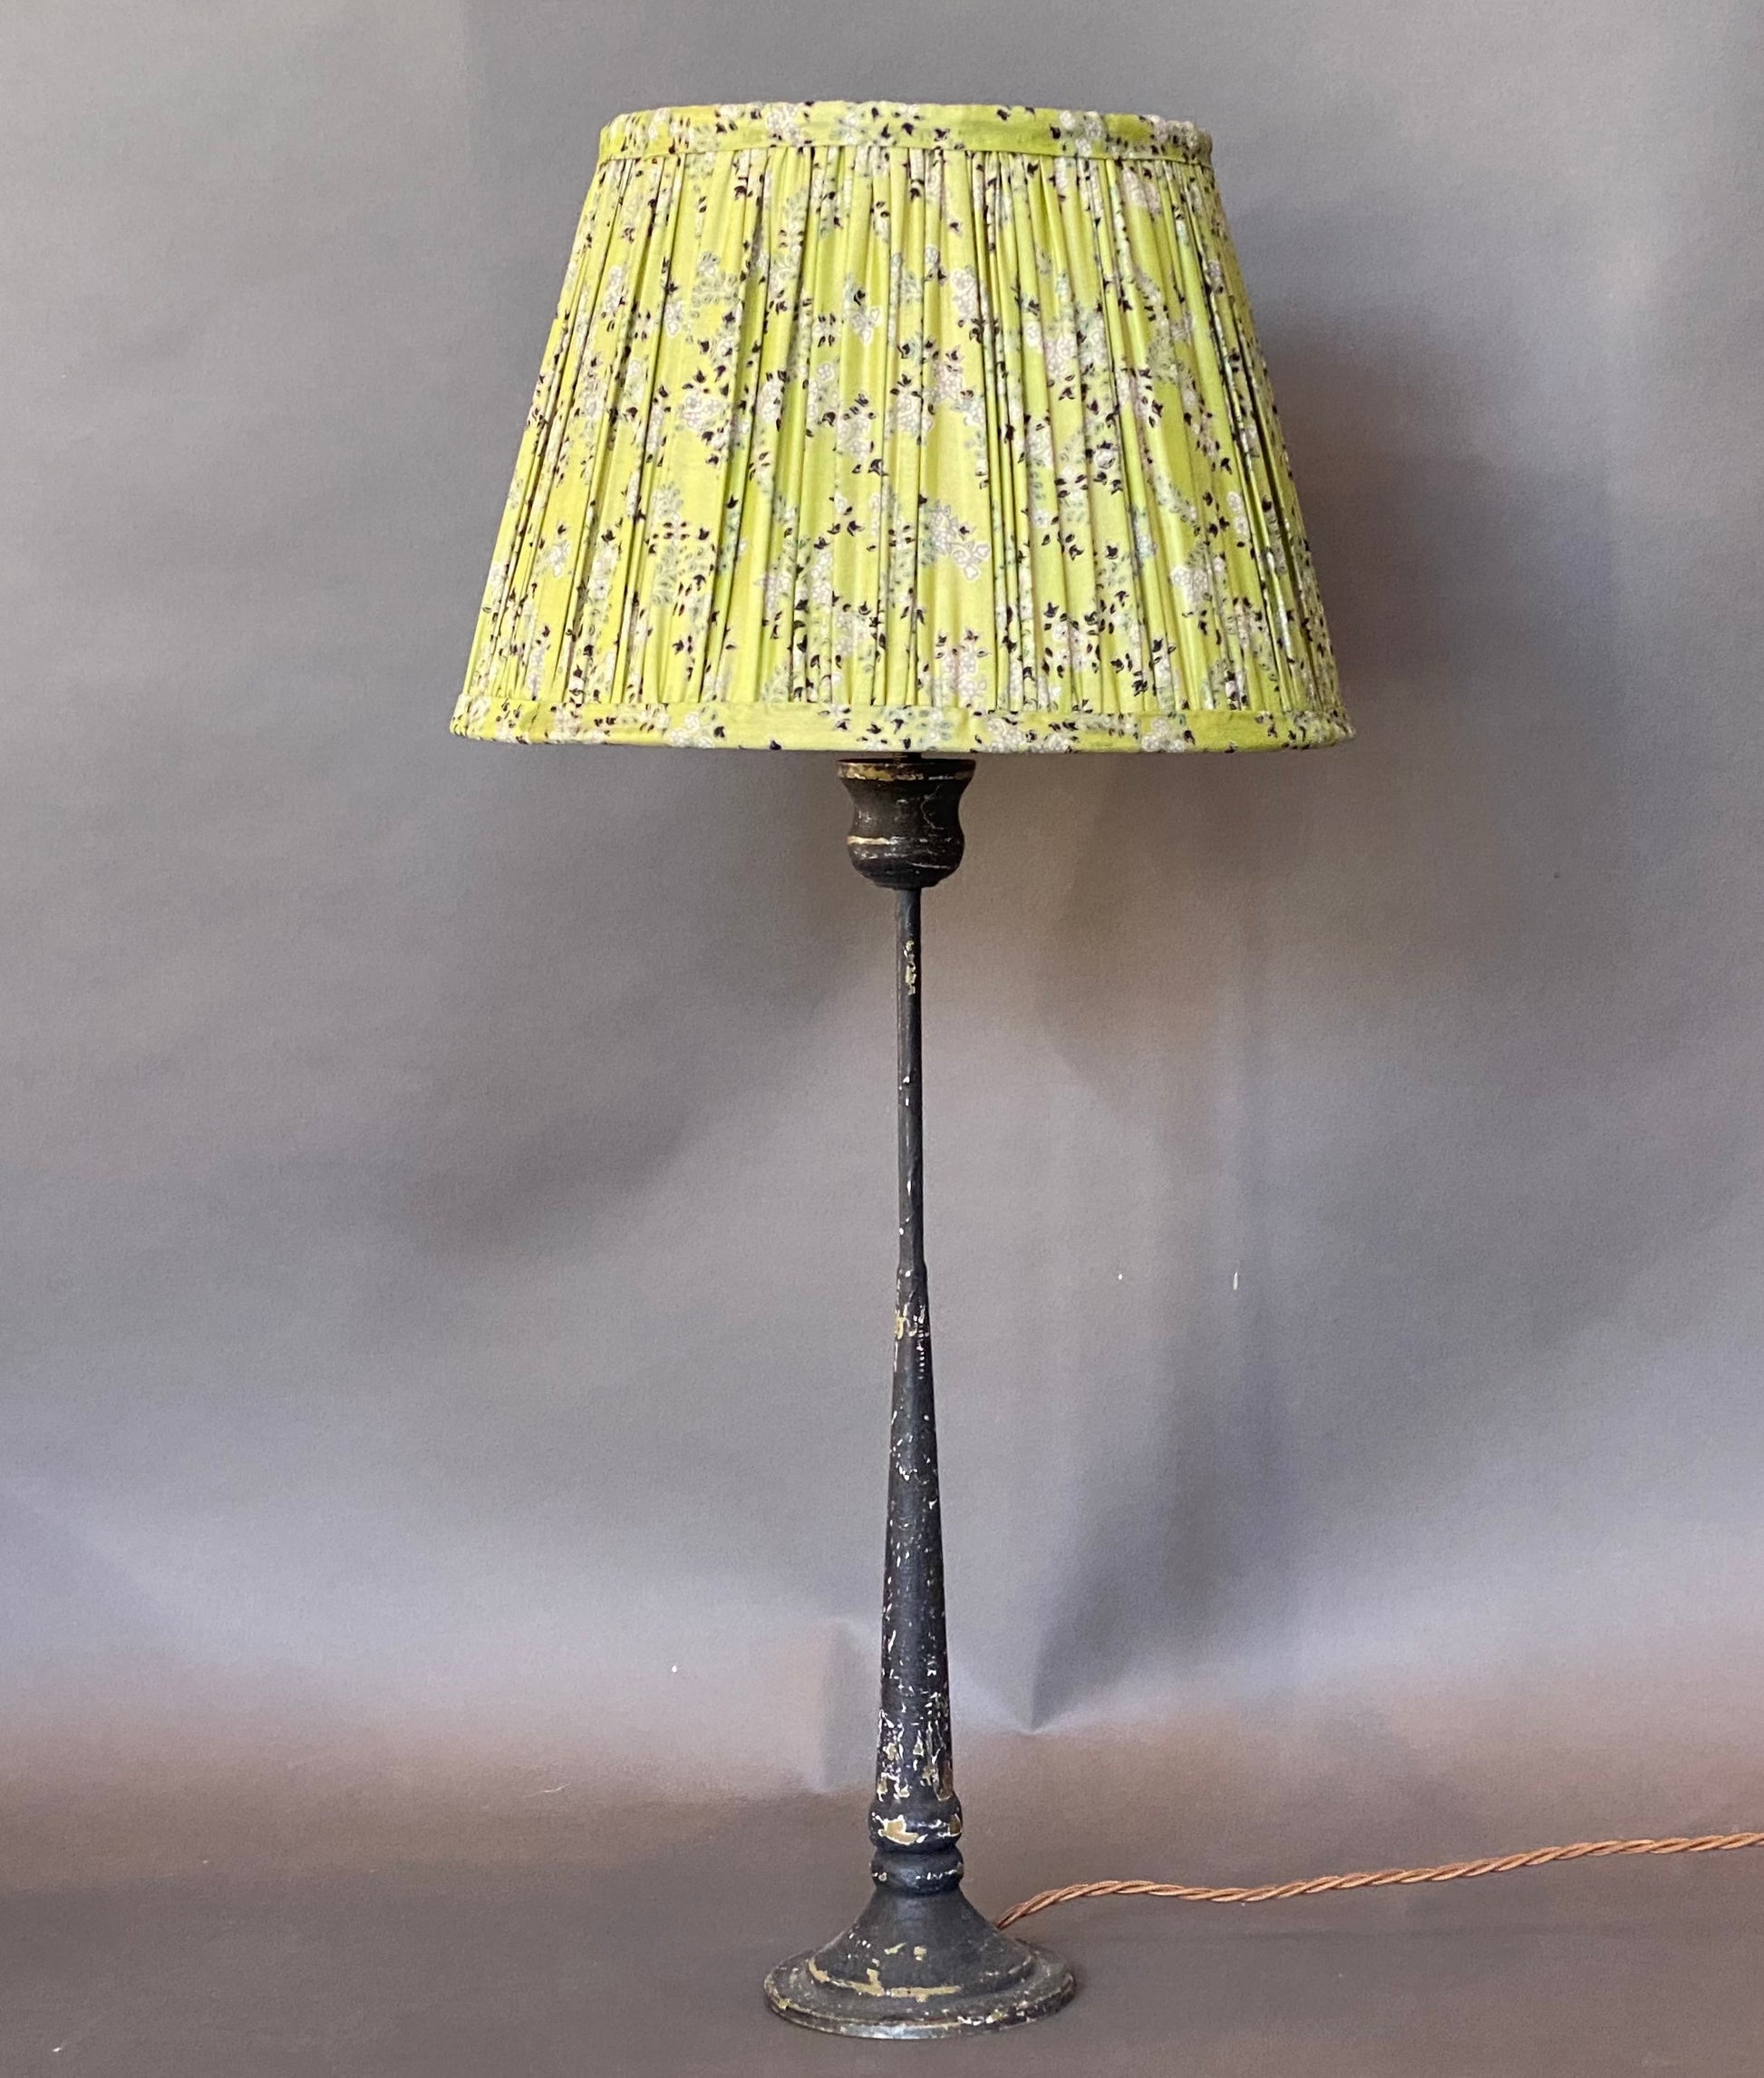 Pistachio paisley silk lampshade shown on a candlestick lamp base